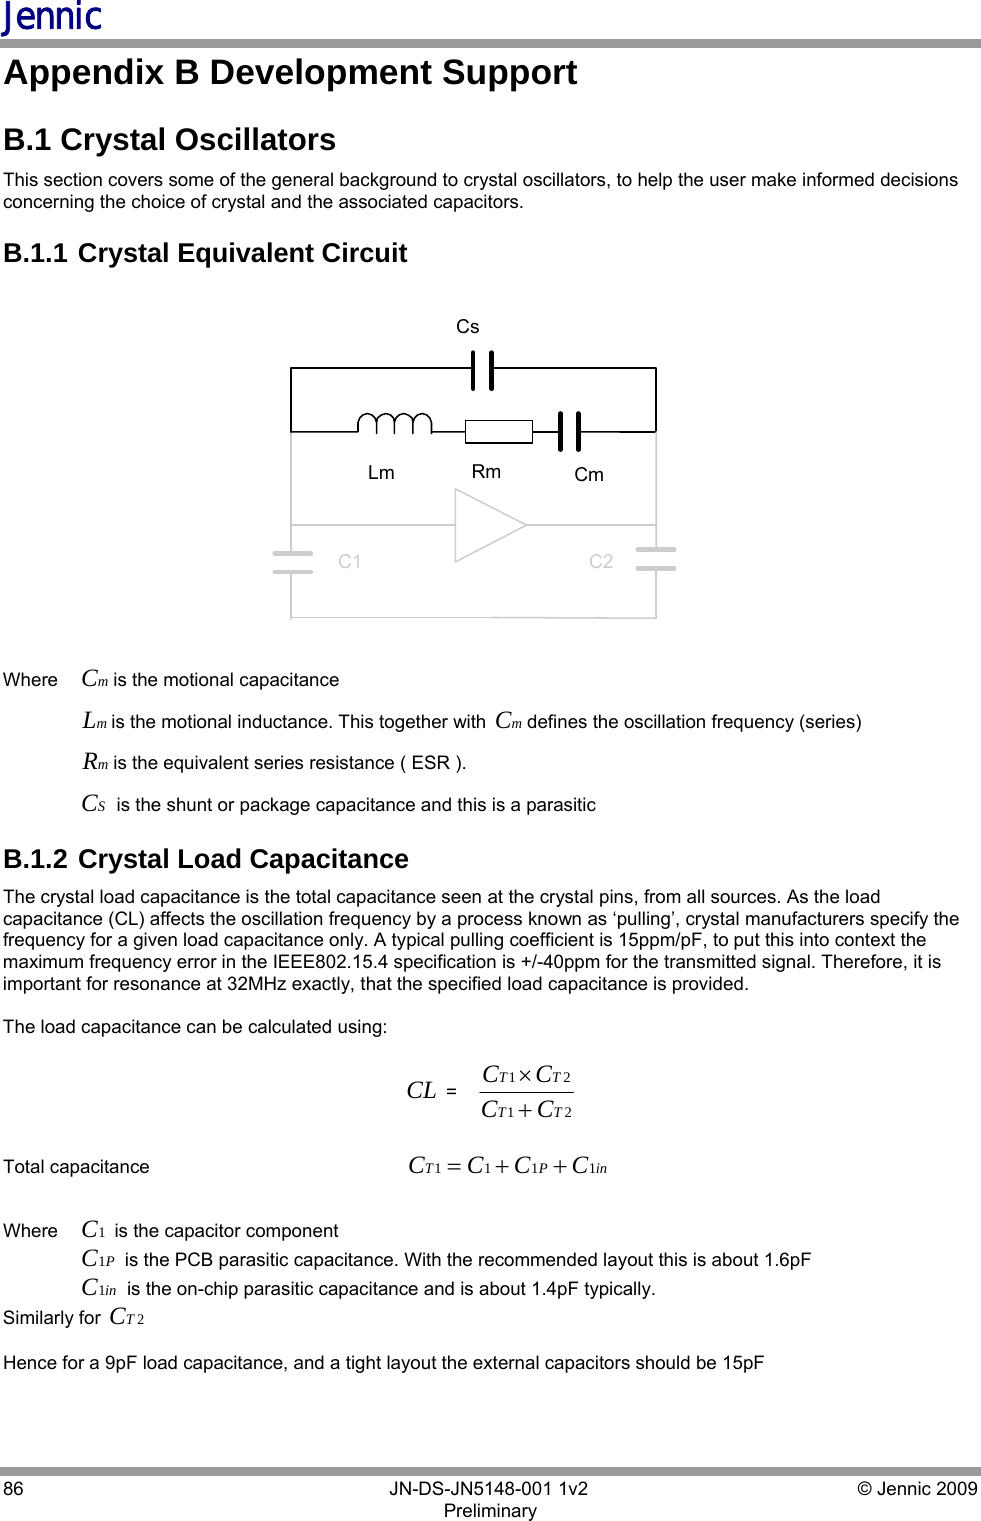 Jennic 86        JN-DS-JN5148-001 1v2  © Jennic 2009 Preliminary  Appendix B Development Support B.1 Crystal Oscillators This section covers some of the general background to crystal oscillators, to help the user make informed decisions concerning the choice of crystal and the associated capacitors.  B.1.1  Crystal Equivalent Circuit  CsLm CmRmC2C1 Where   mCis the motional capacitance   mLis the motional inductance. This together with  mCdefines the oscillation frequency (series)  mRis the equivalent series resistance ( ESR ).   SC is the shunt or package capacitance and this is a parasitic  B.1.2  Crystal Load Capacitance The crystal load capacitance is the total capacitance seen at the crystal pins, from all sources. As the load capacitance (CL) affects the oscillation frequency by a process known as ‘pulling’, crystal manufacturers specify the frequency for a given load capacitance only. A typical pulling coefficient is 15ppm/pF, to put this into context the maximum frequency error in the IEEE802.15.4 specification is +/-40ppm for the transmitted signal. Therefore, it is important for resonance at 32MHz exactly, that the specified load capacitance is provided.   The load capacitance can be calculated using:   CL =2121TTTTCCCC+×  Total capacitance                                                  inPT CCCC 1111++=    Where   1C is the capacitor component   PC1 is the PCB parasitic capacitance. With the recommended layout this is about 1.6pF  inC1 is the on-chip parasitic capacitance and is about 1.4pF typically. Similarly for  2TC  Hence for a 9pF load capacitance, and a tight layout the external capacitors should be 15pF  